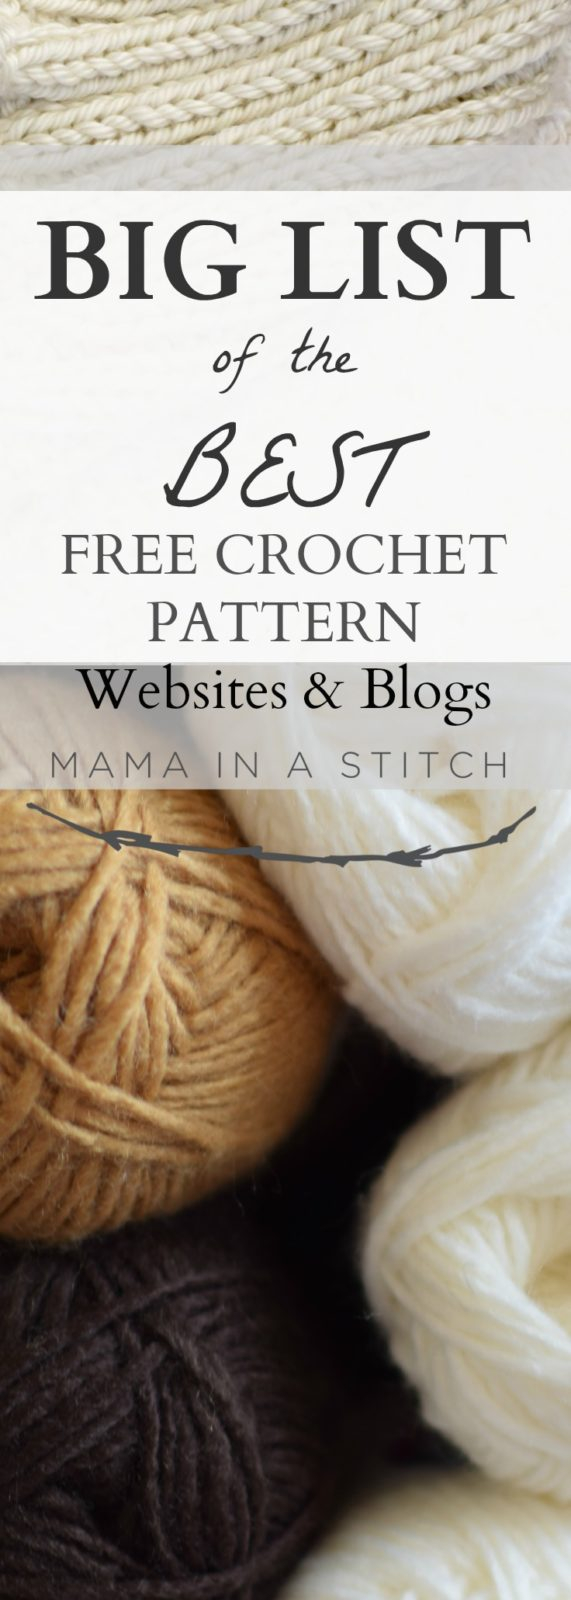 Knitting Blogs With Patterns Big List Of Free Crochet Pattern Blogs Websites Mama In A Stitch